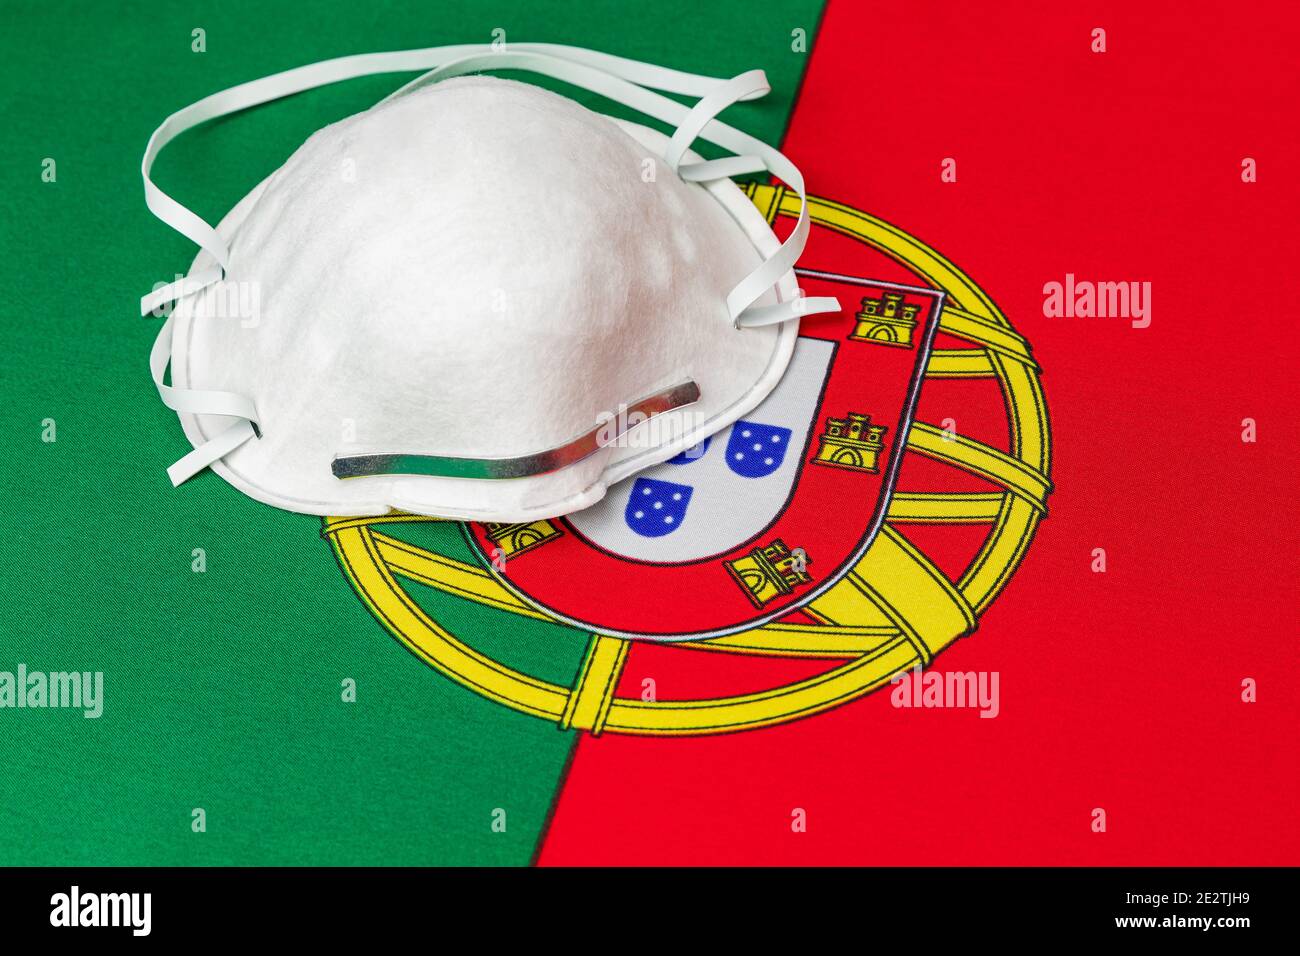 Portugal flag and N95 face mask. Concept of Covid-19 coronavirus lockdown, travel ban and healthcare crisis Stock Photo